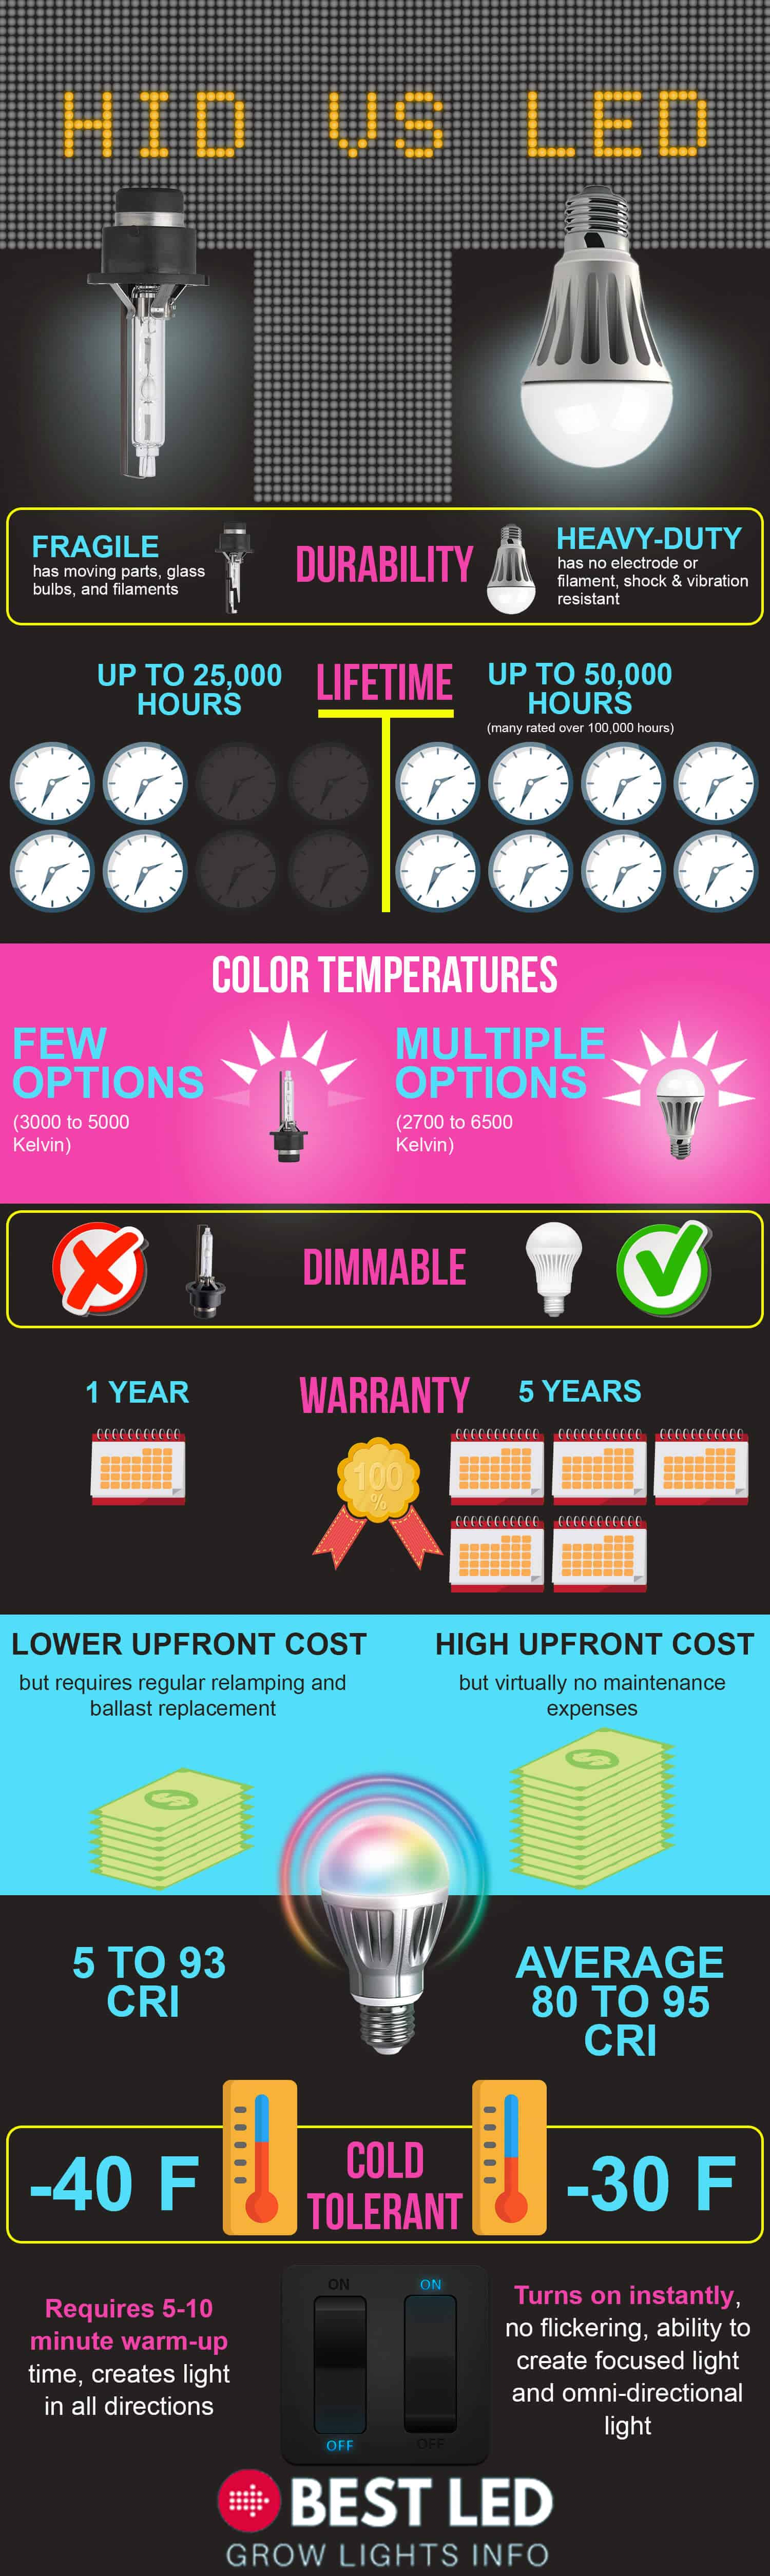 LED vs HID Lights for Indoor Growing Infographic Best LED Grow Lights